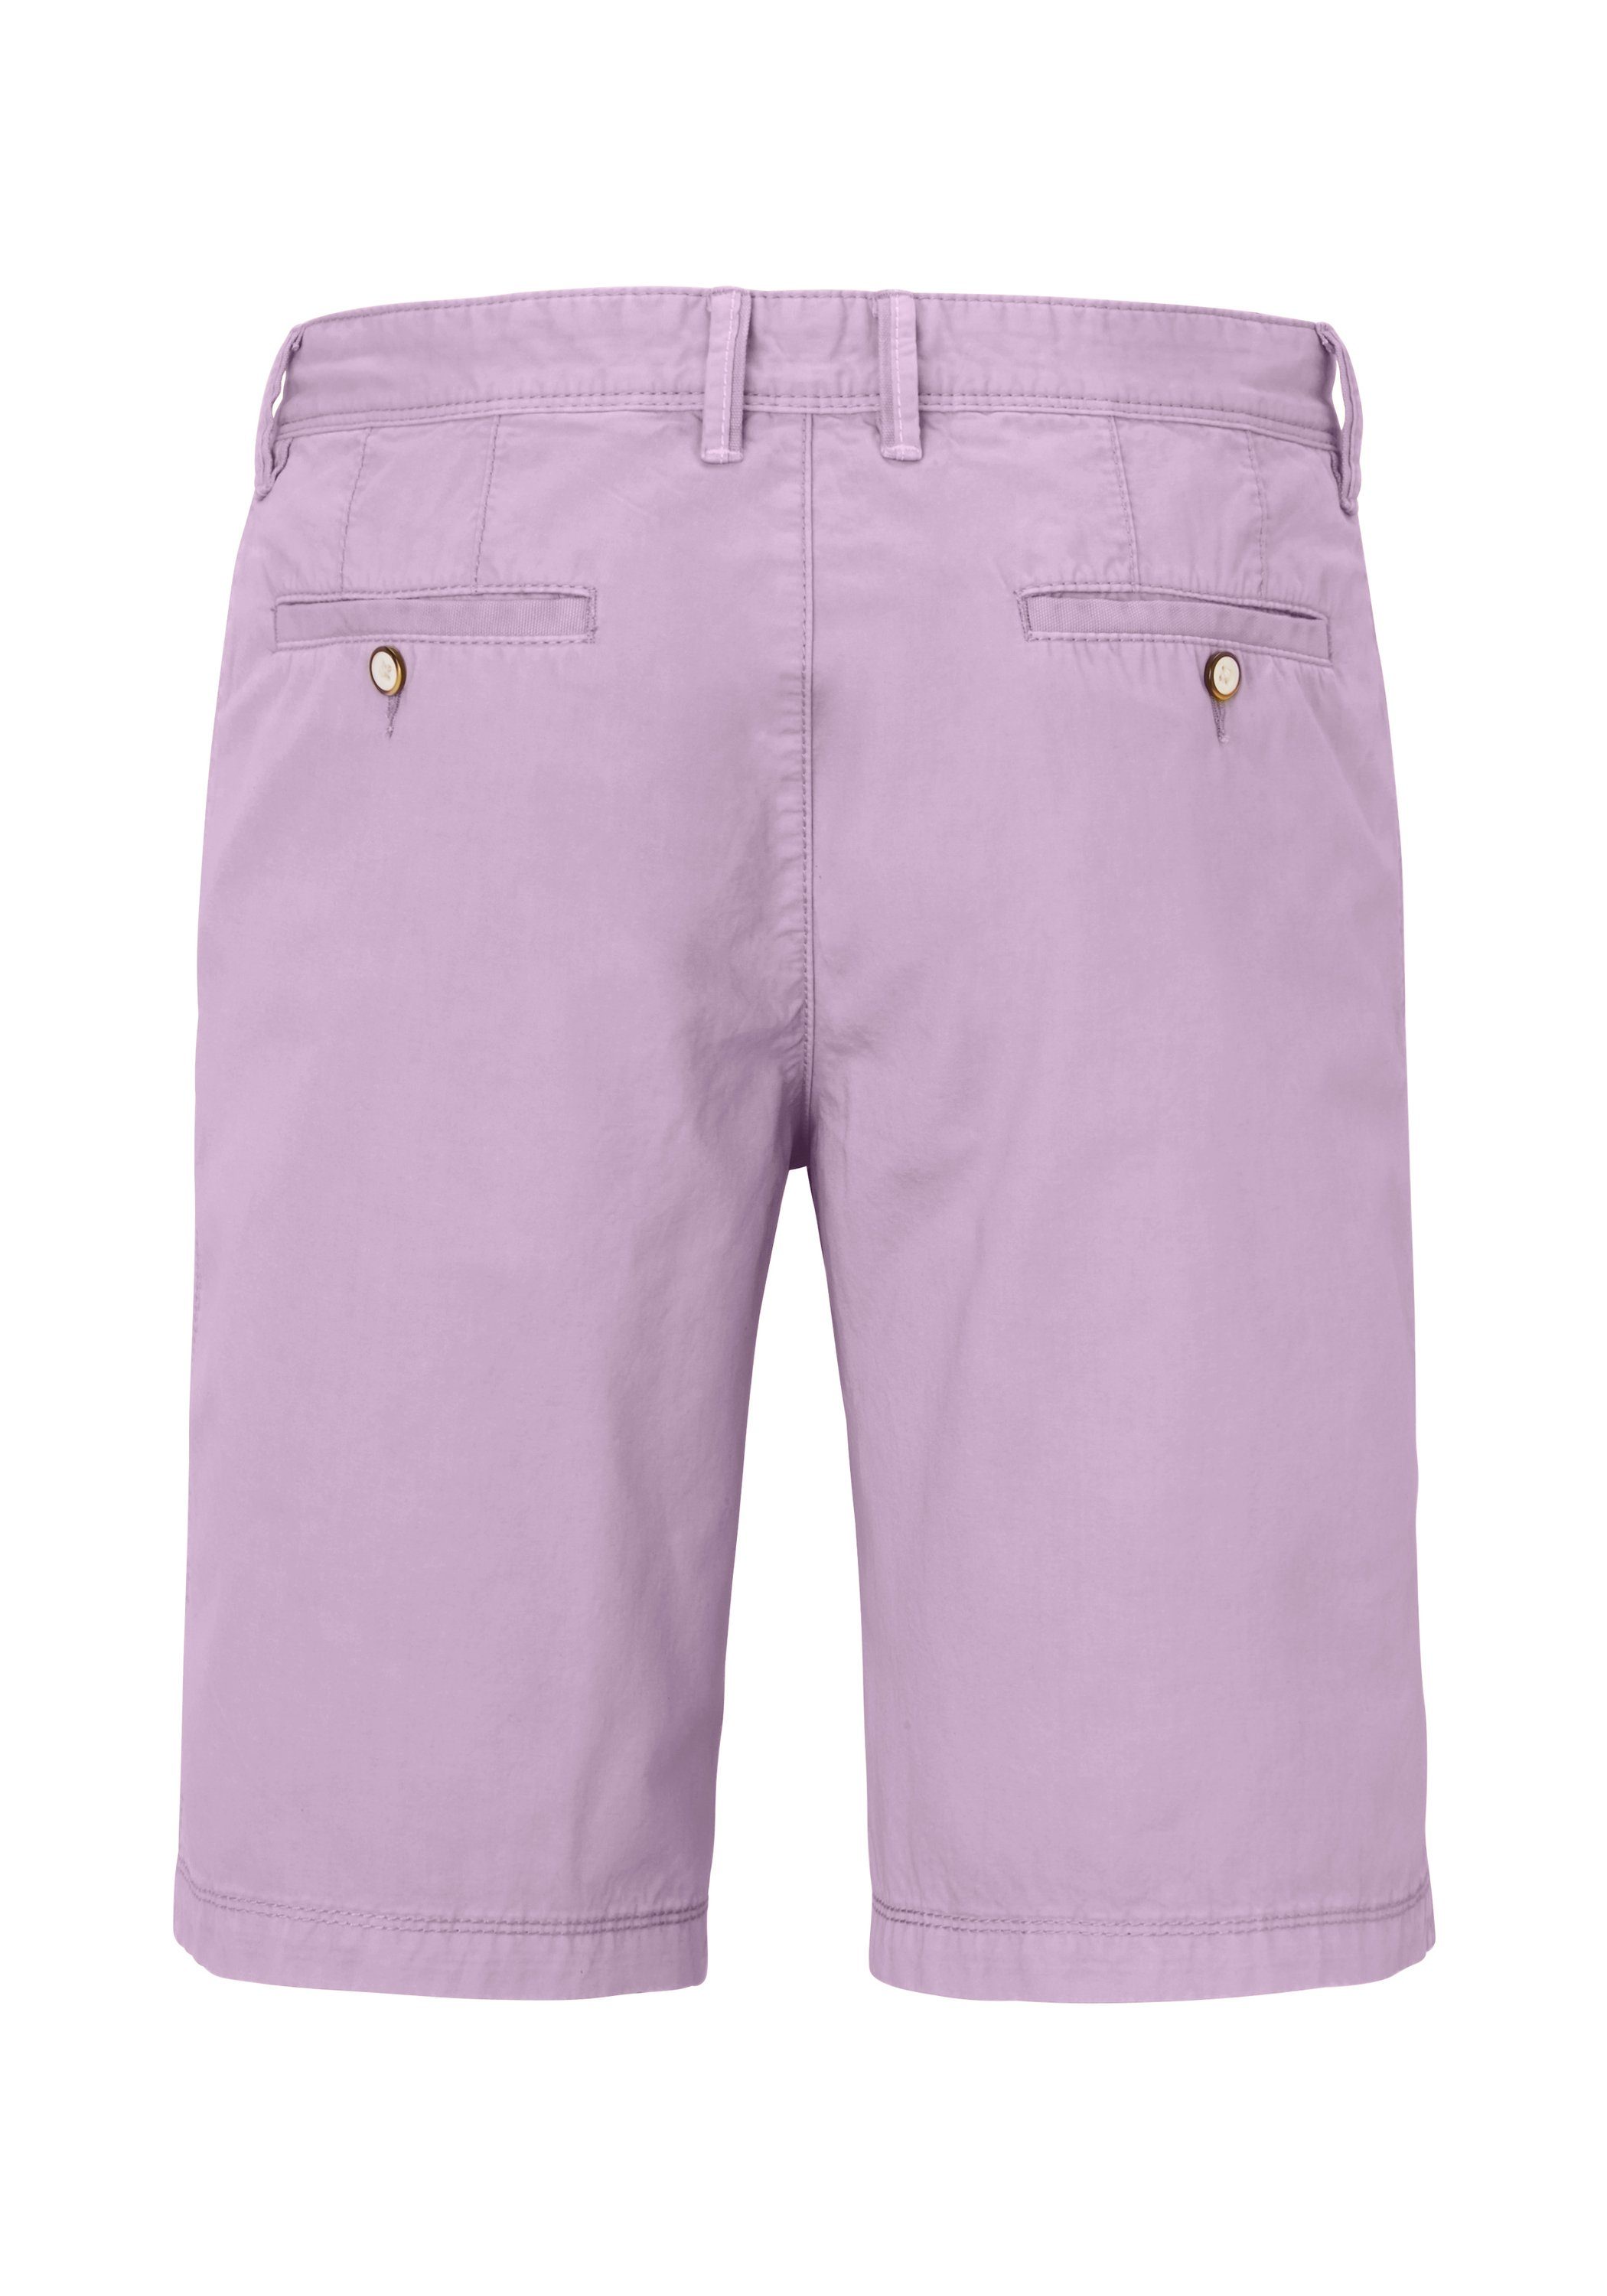 16 Surray Chinoshorts Bermudas Edition Shades pale Moderne Redpoint Chino - lilac